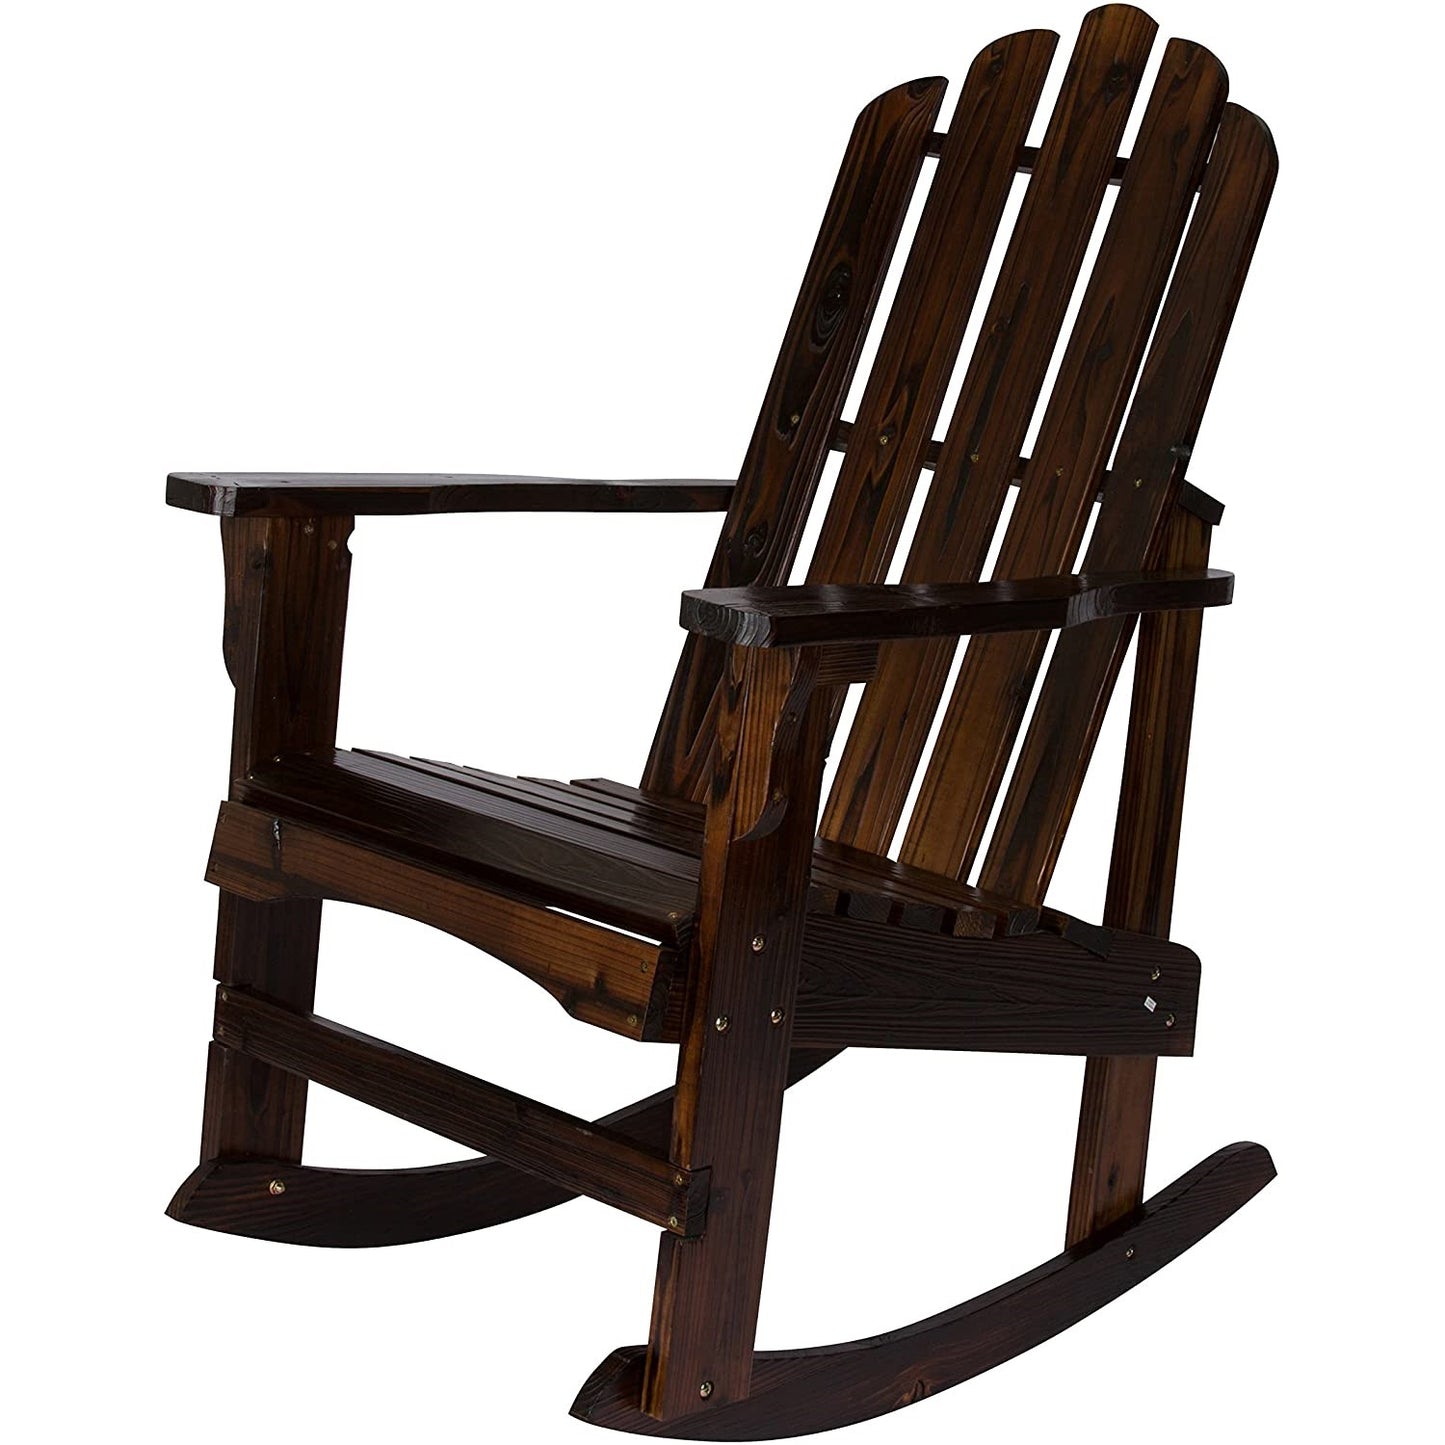 Patio Watcher Poly Lumber Classic Rocking Adirondack Chair with Cup Holder